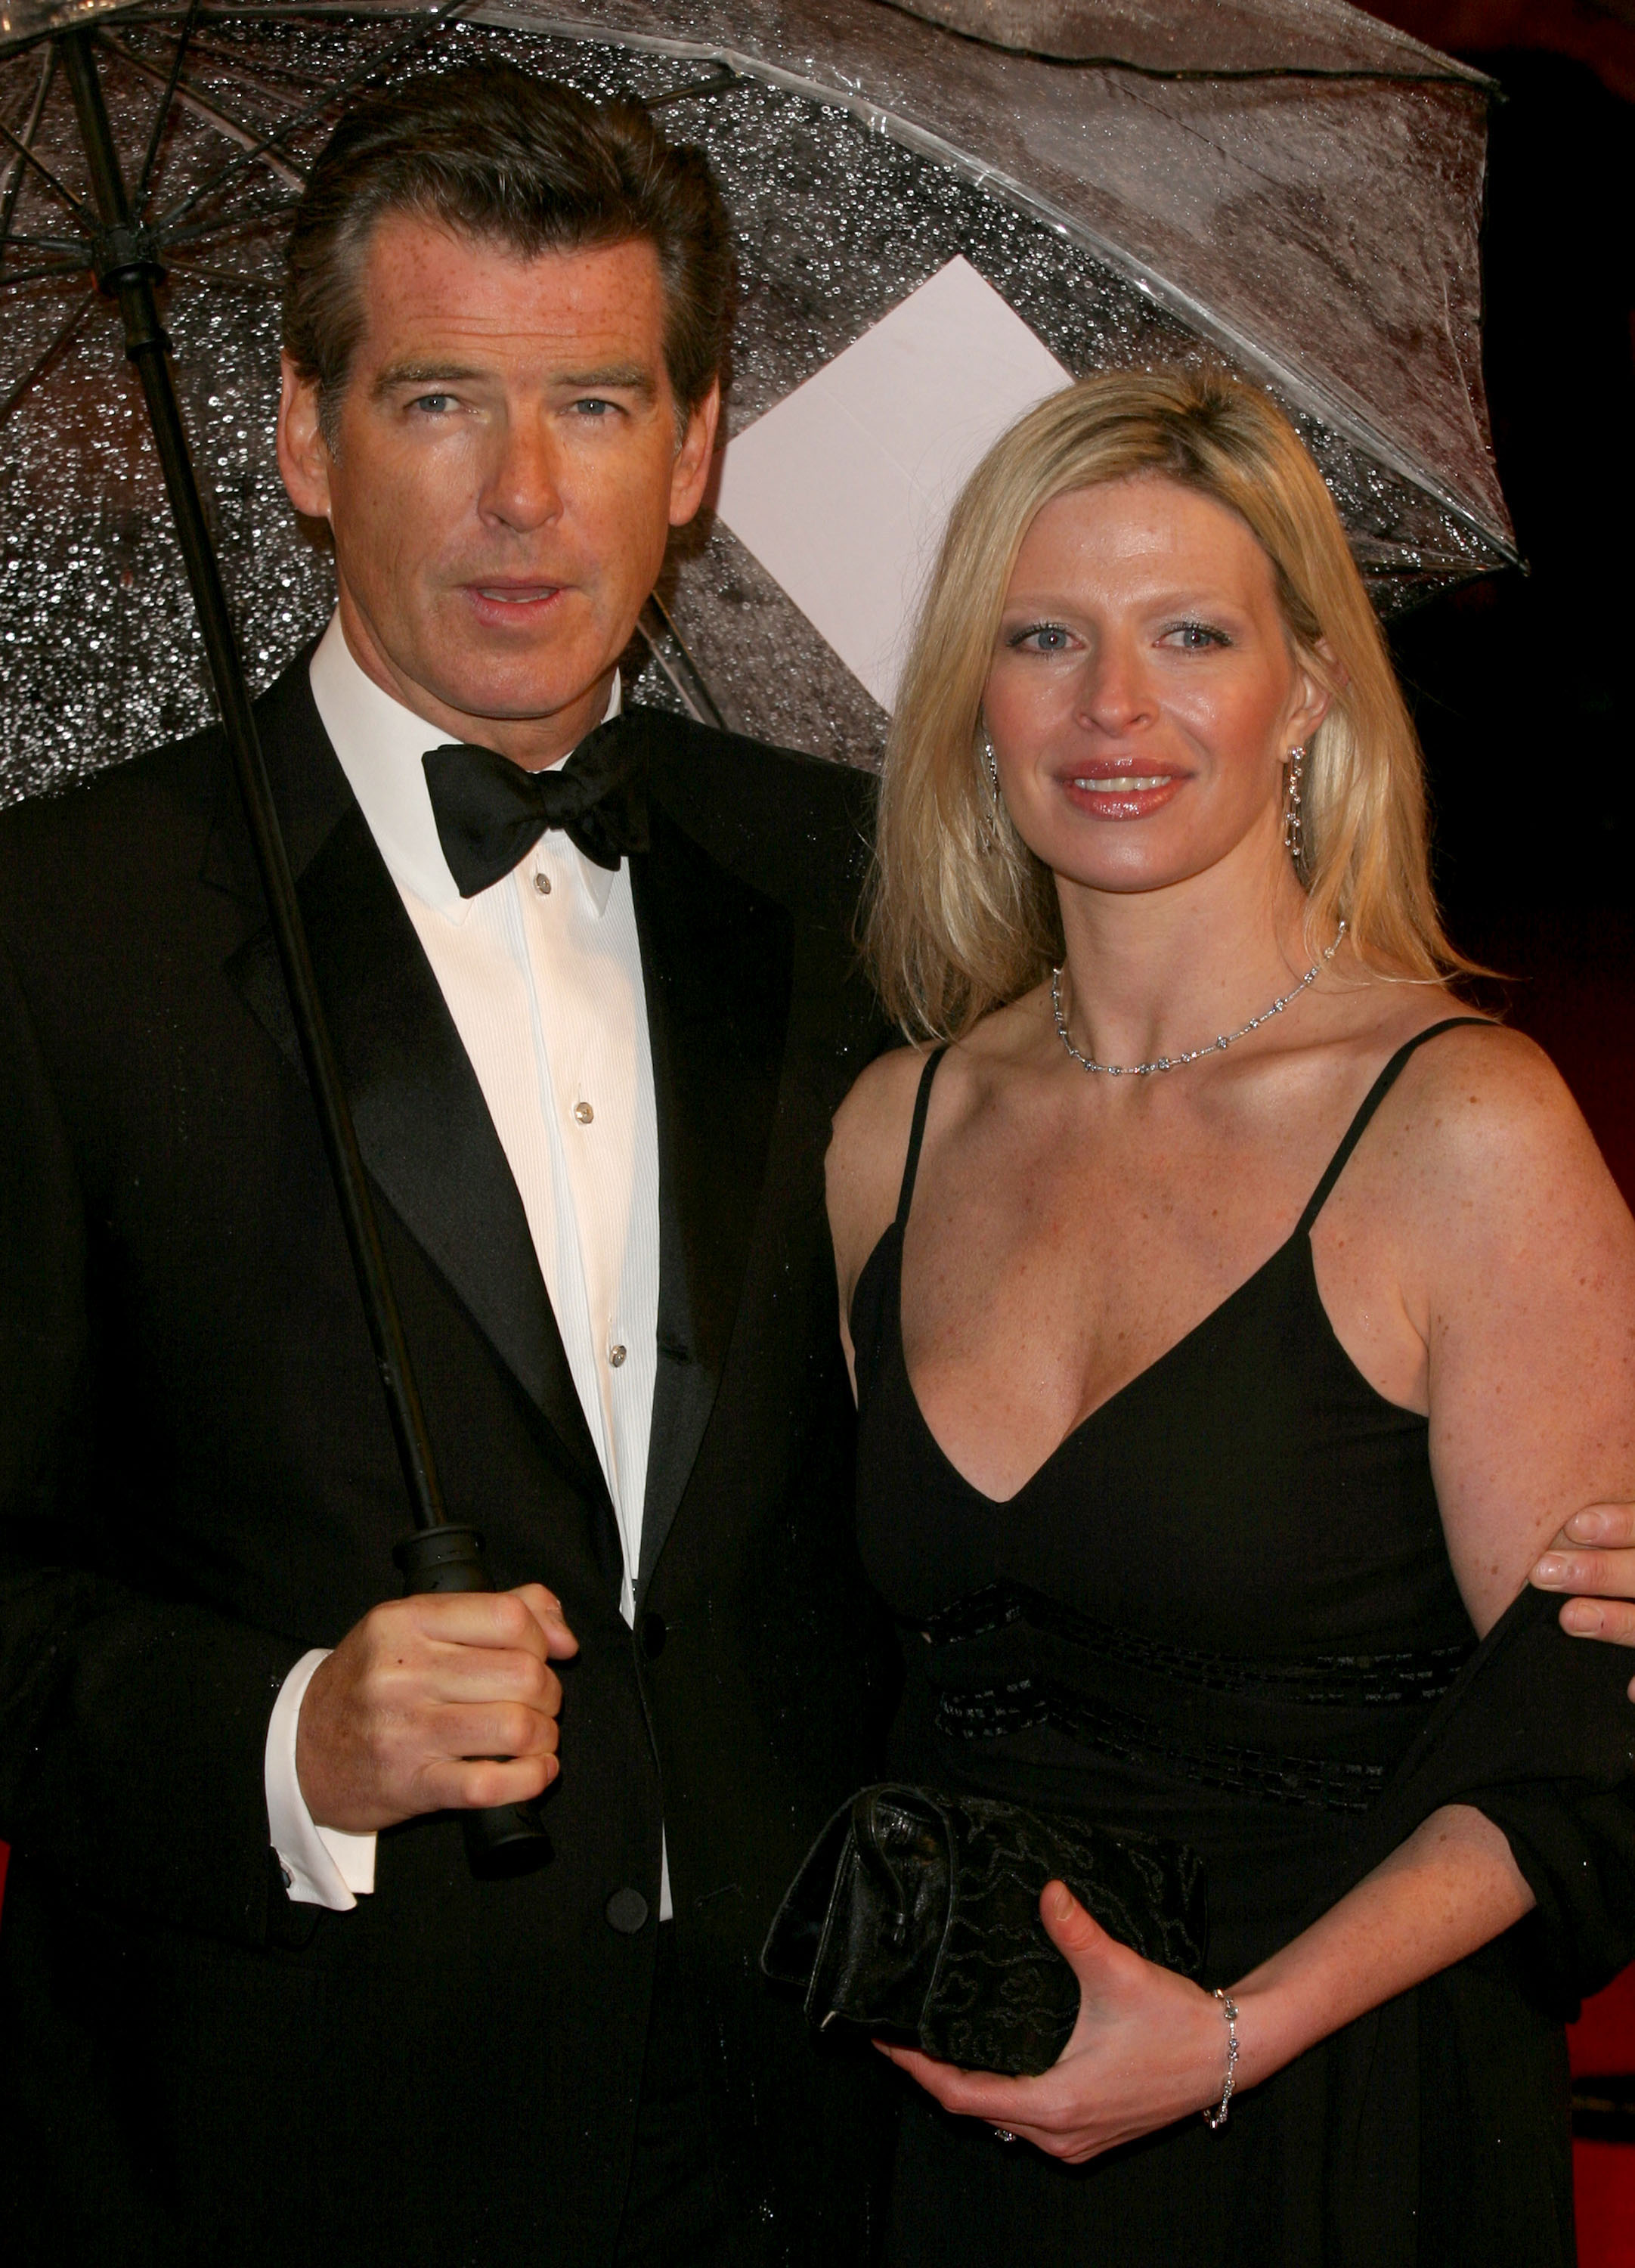 Pierce Brosnan and Charlotte Brosnan at The Orange British Academy Film Awards on February 19, 2006 | Source: Getty Images